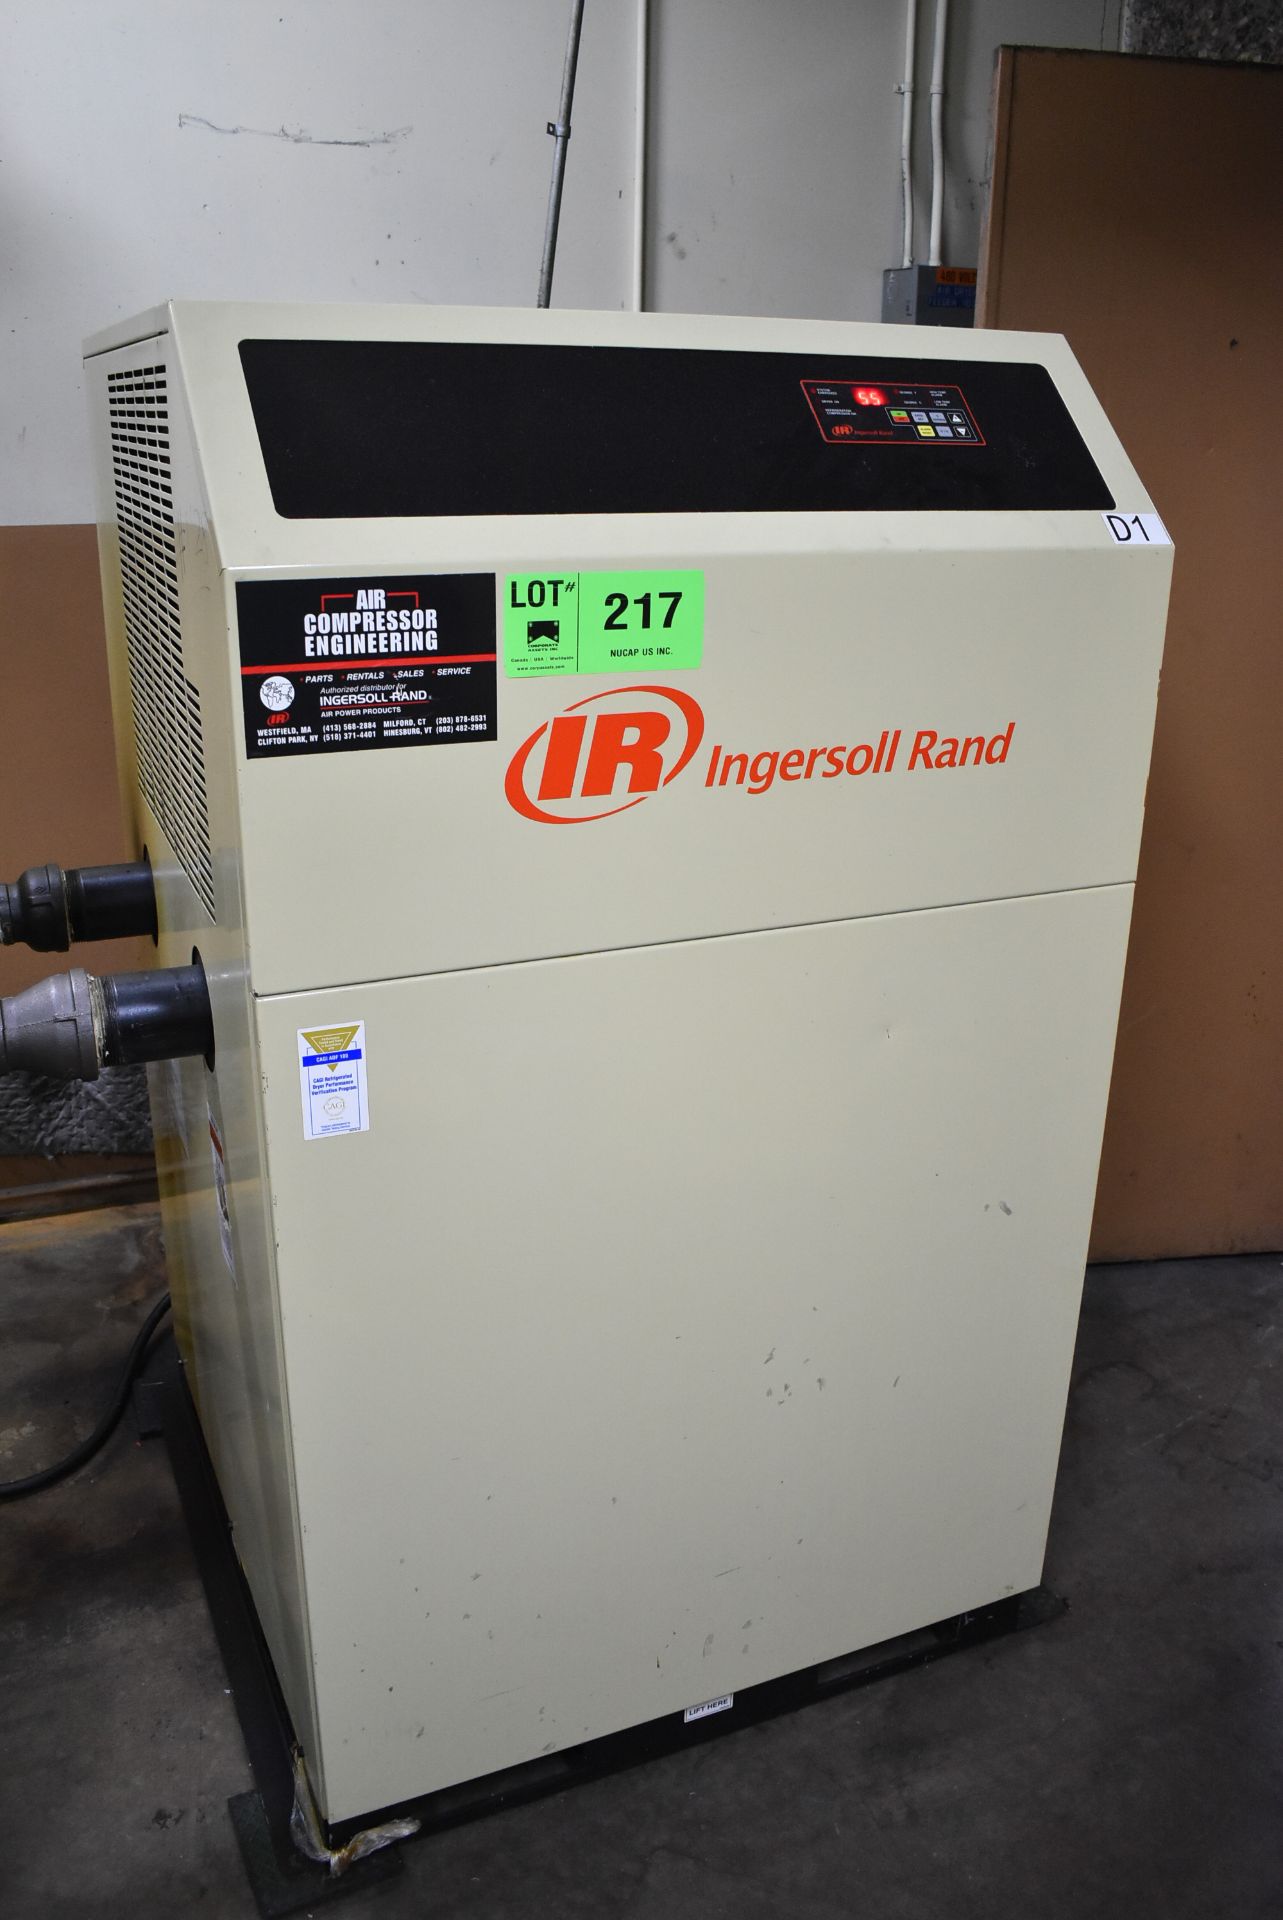 INGERSOLL-RAND NVC600A400 REFRIGERATED AIR DRYER WITH 230 PSIG, 1 HP, S/N: 336365 (CI) (DELAYED